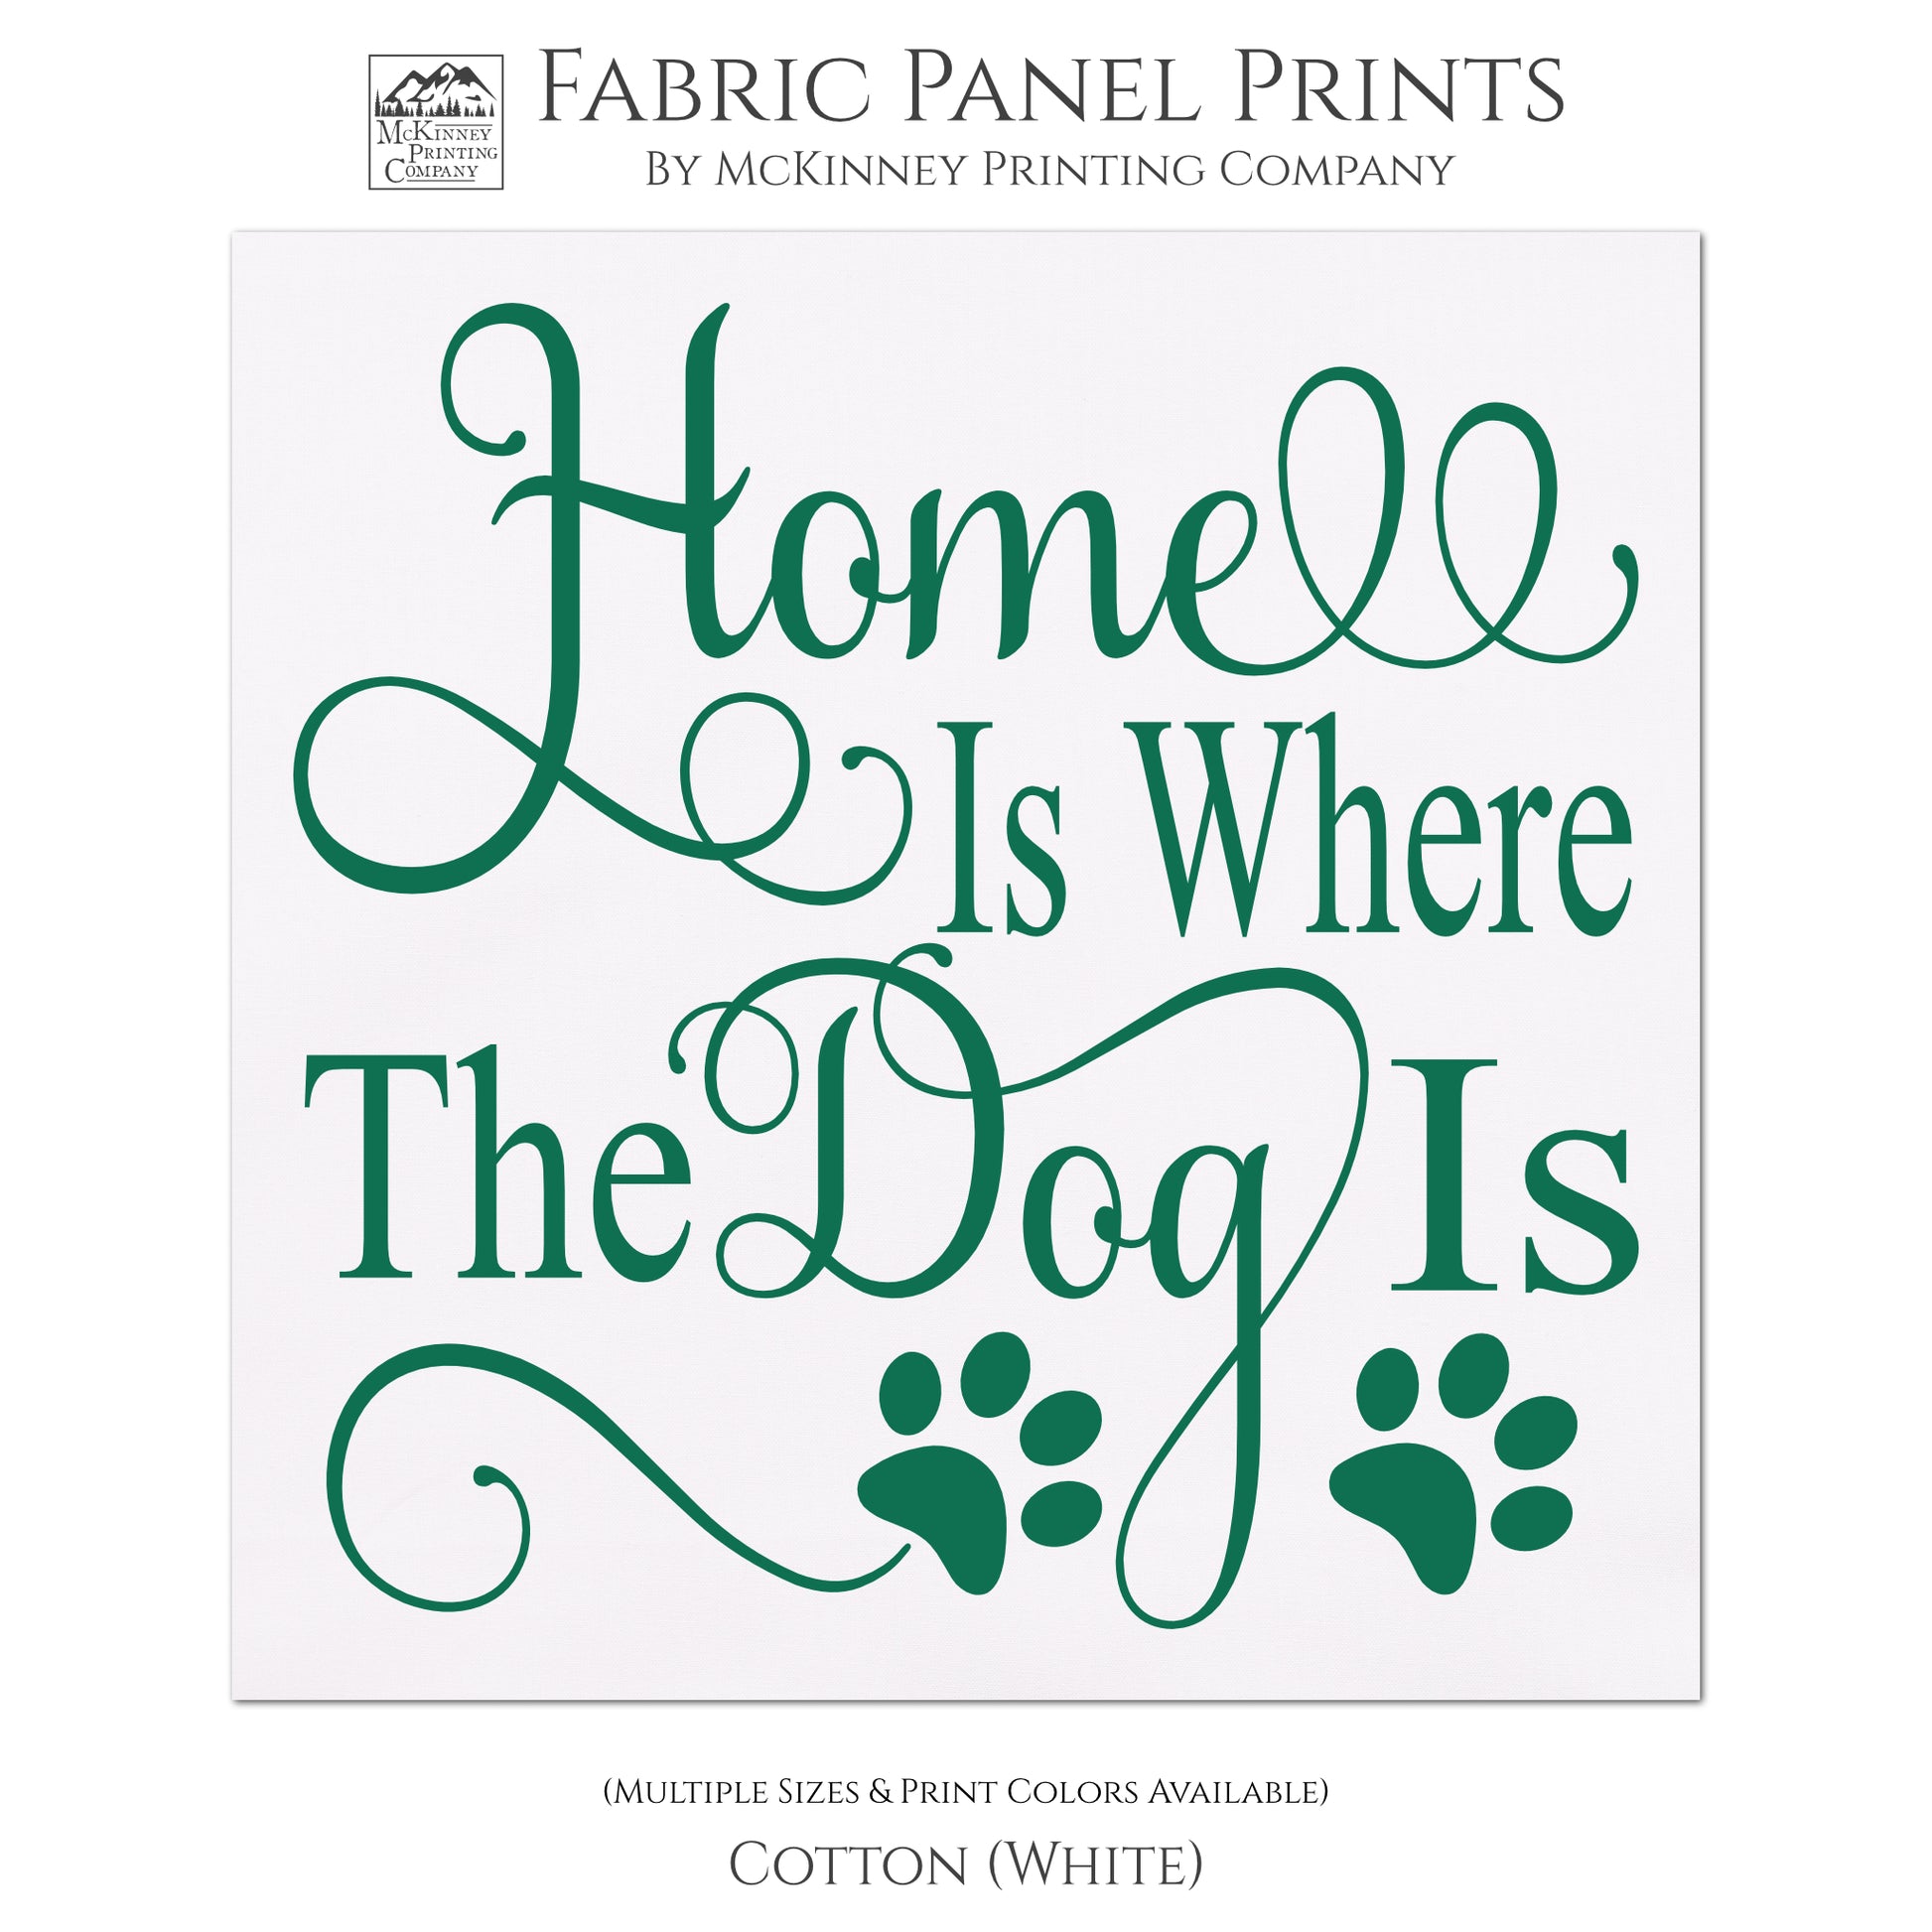 Dog Print Fabric, Saying, Quote, Home is where the dog is, Quilting, Quilt Fabric Panel Block - Cotton, White